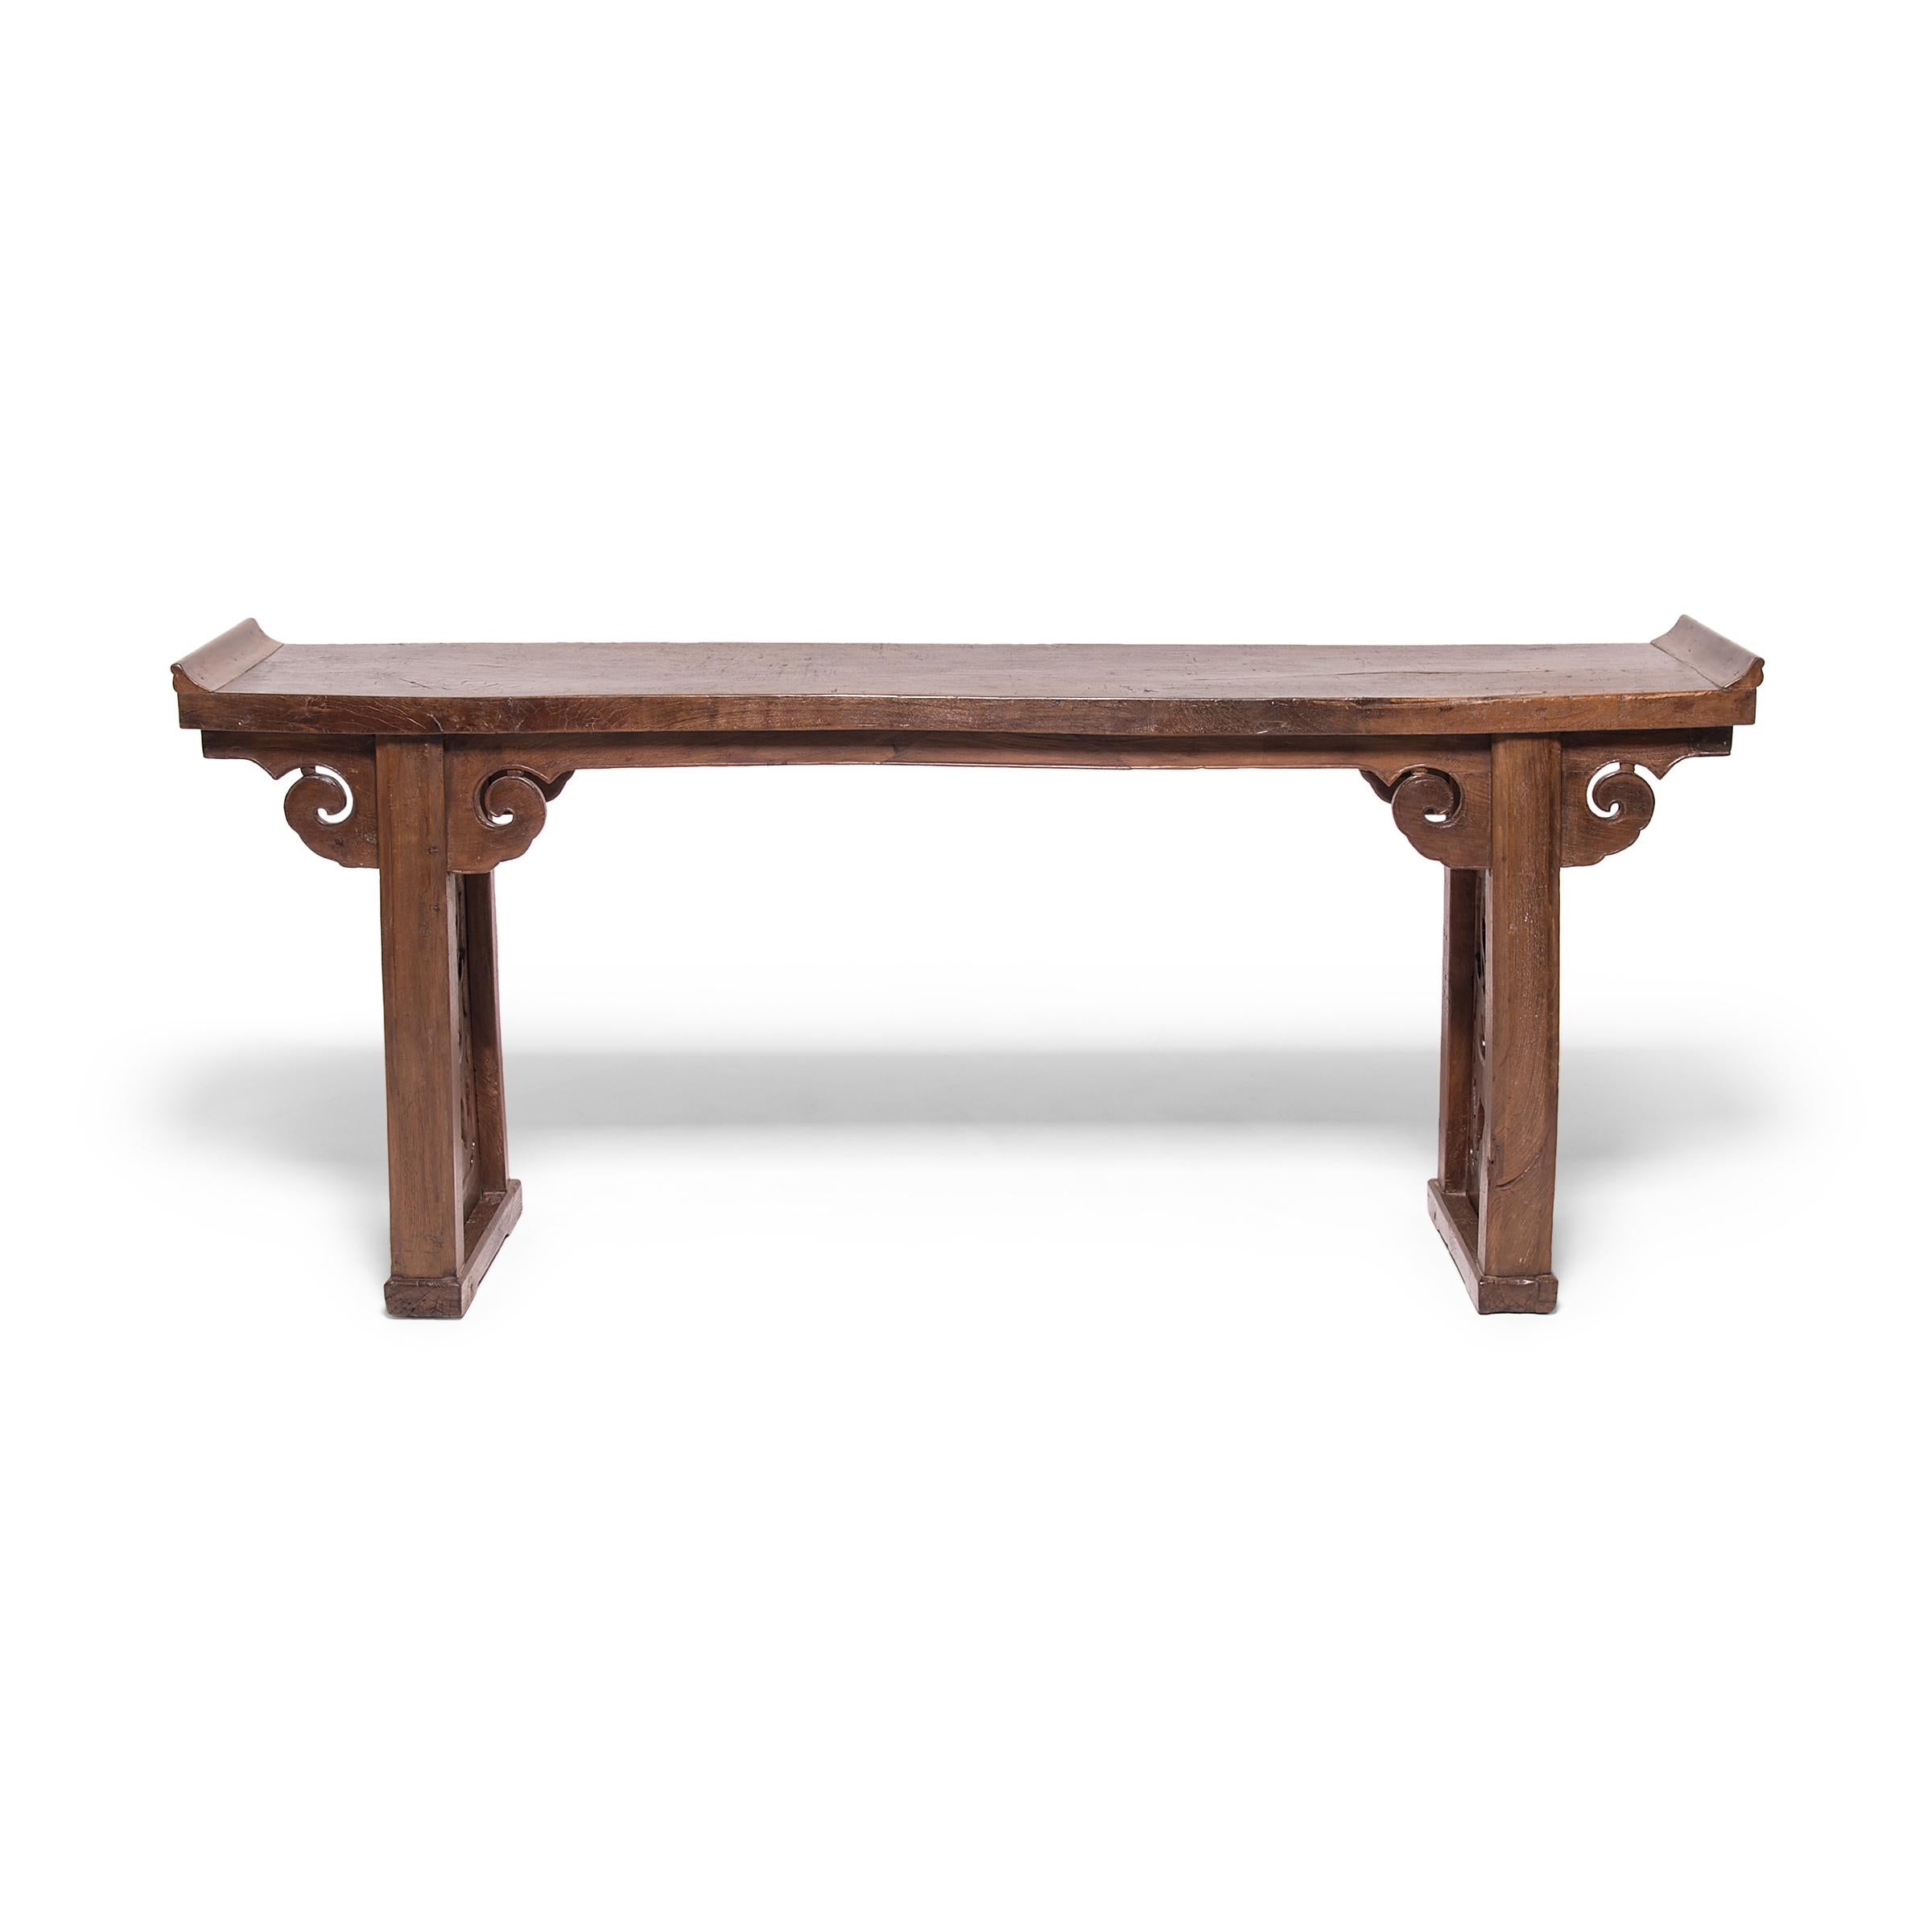 A prime example of Qing-dynasty furniture design, this 19th century table from China's Shanxi province is beautifully proportioned and combines practical considerations with aesthetic principles. Its top is carved from a solid piece of walnut